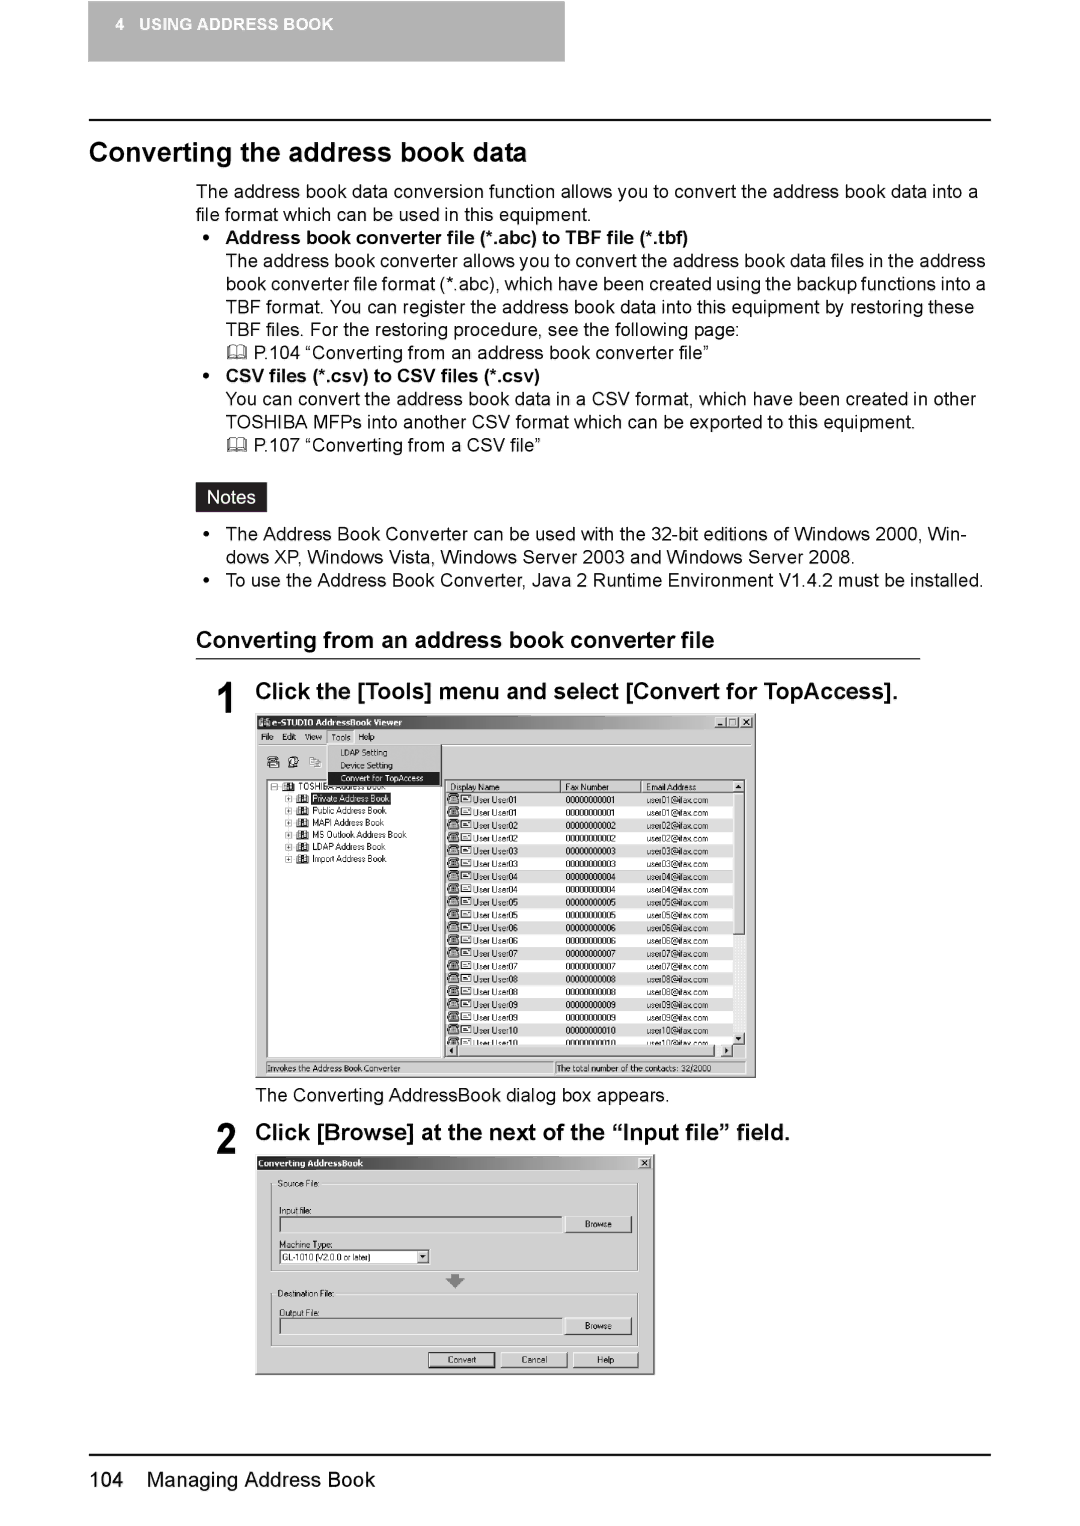 Toshiba GA-1191 manual Converting the address book data, Click Browse at the next of the Input file field 